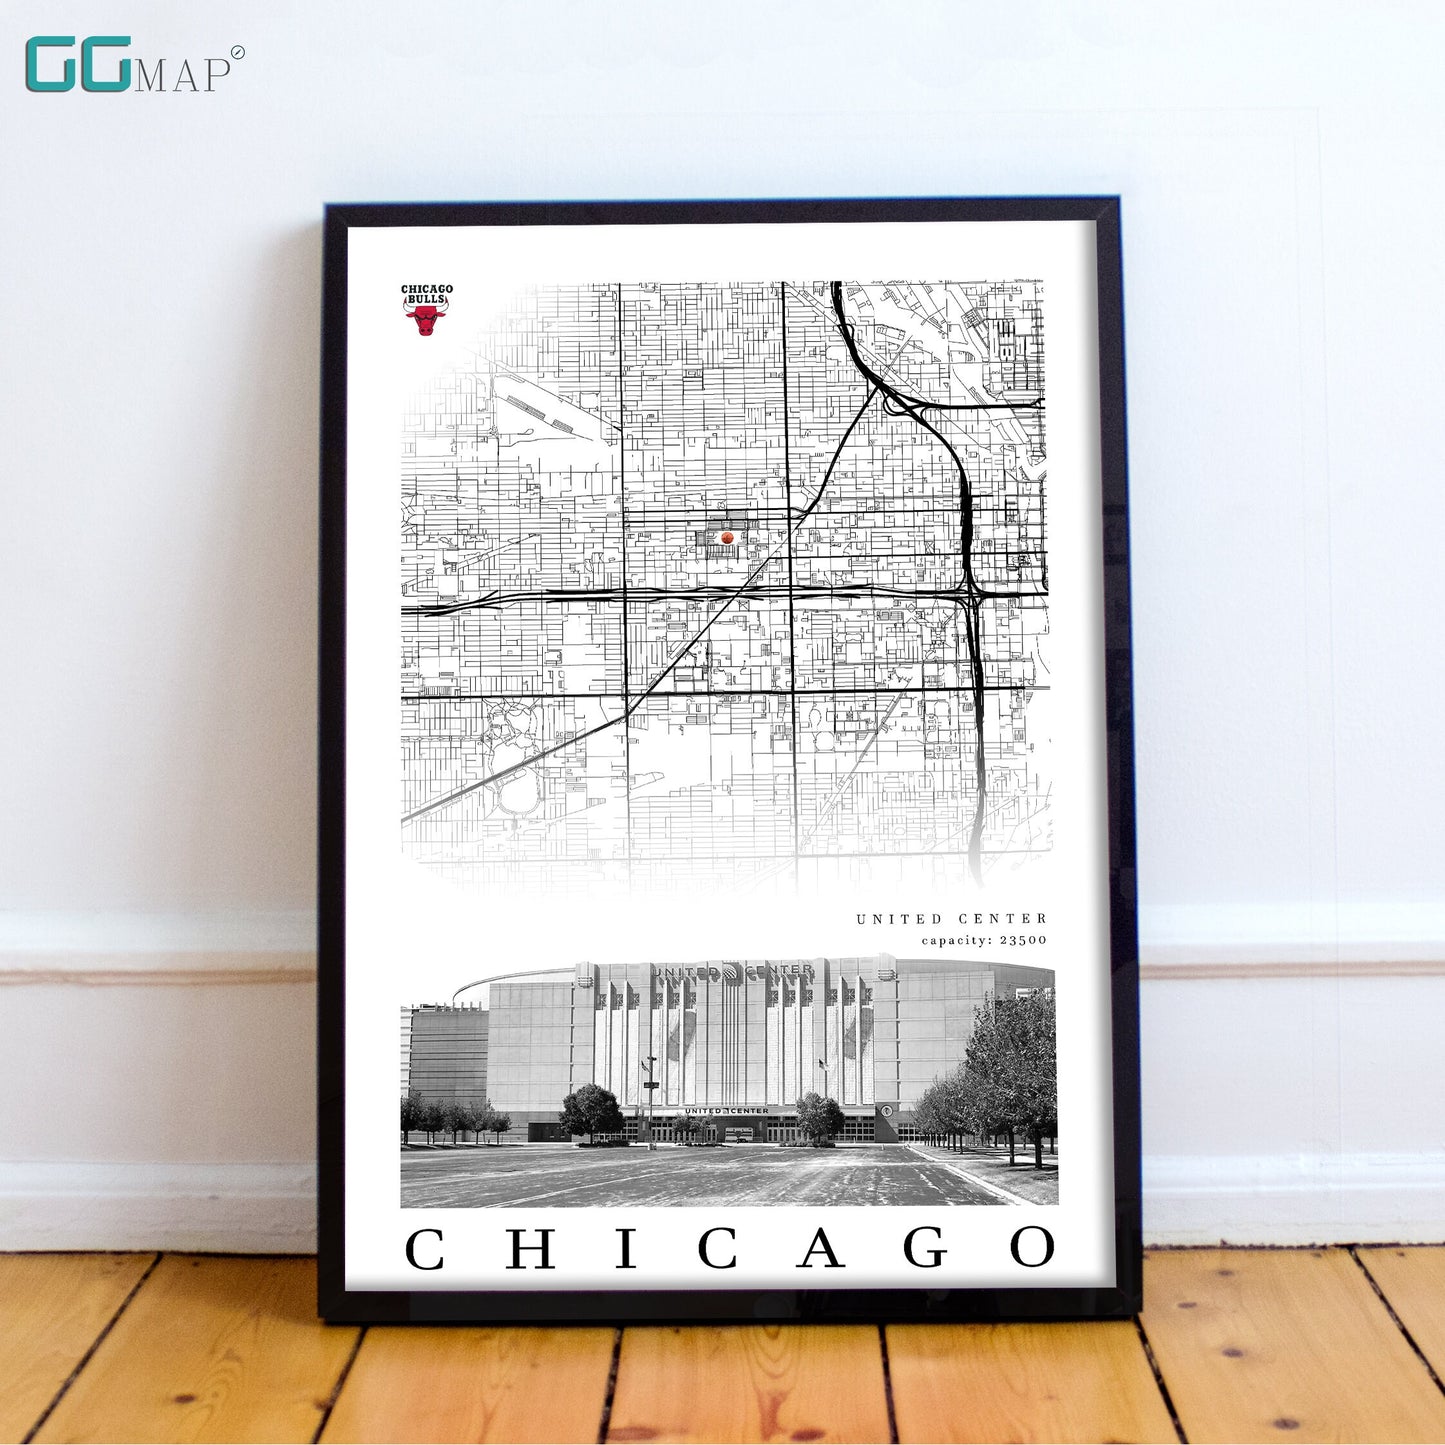 City map of CHICAGO - United Center - Home Decor Chicago - United Center wall decor - Chicago poster - United Center gift - Print map